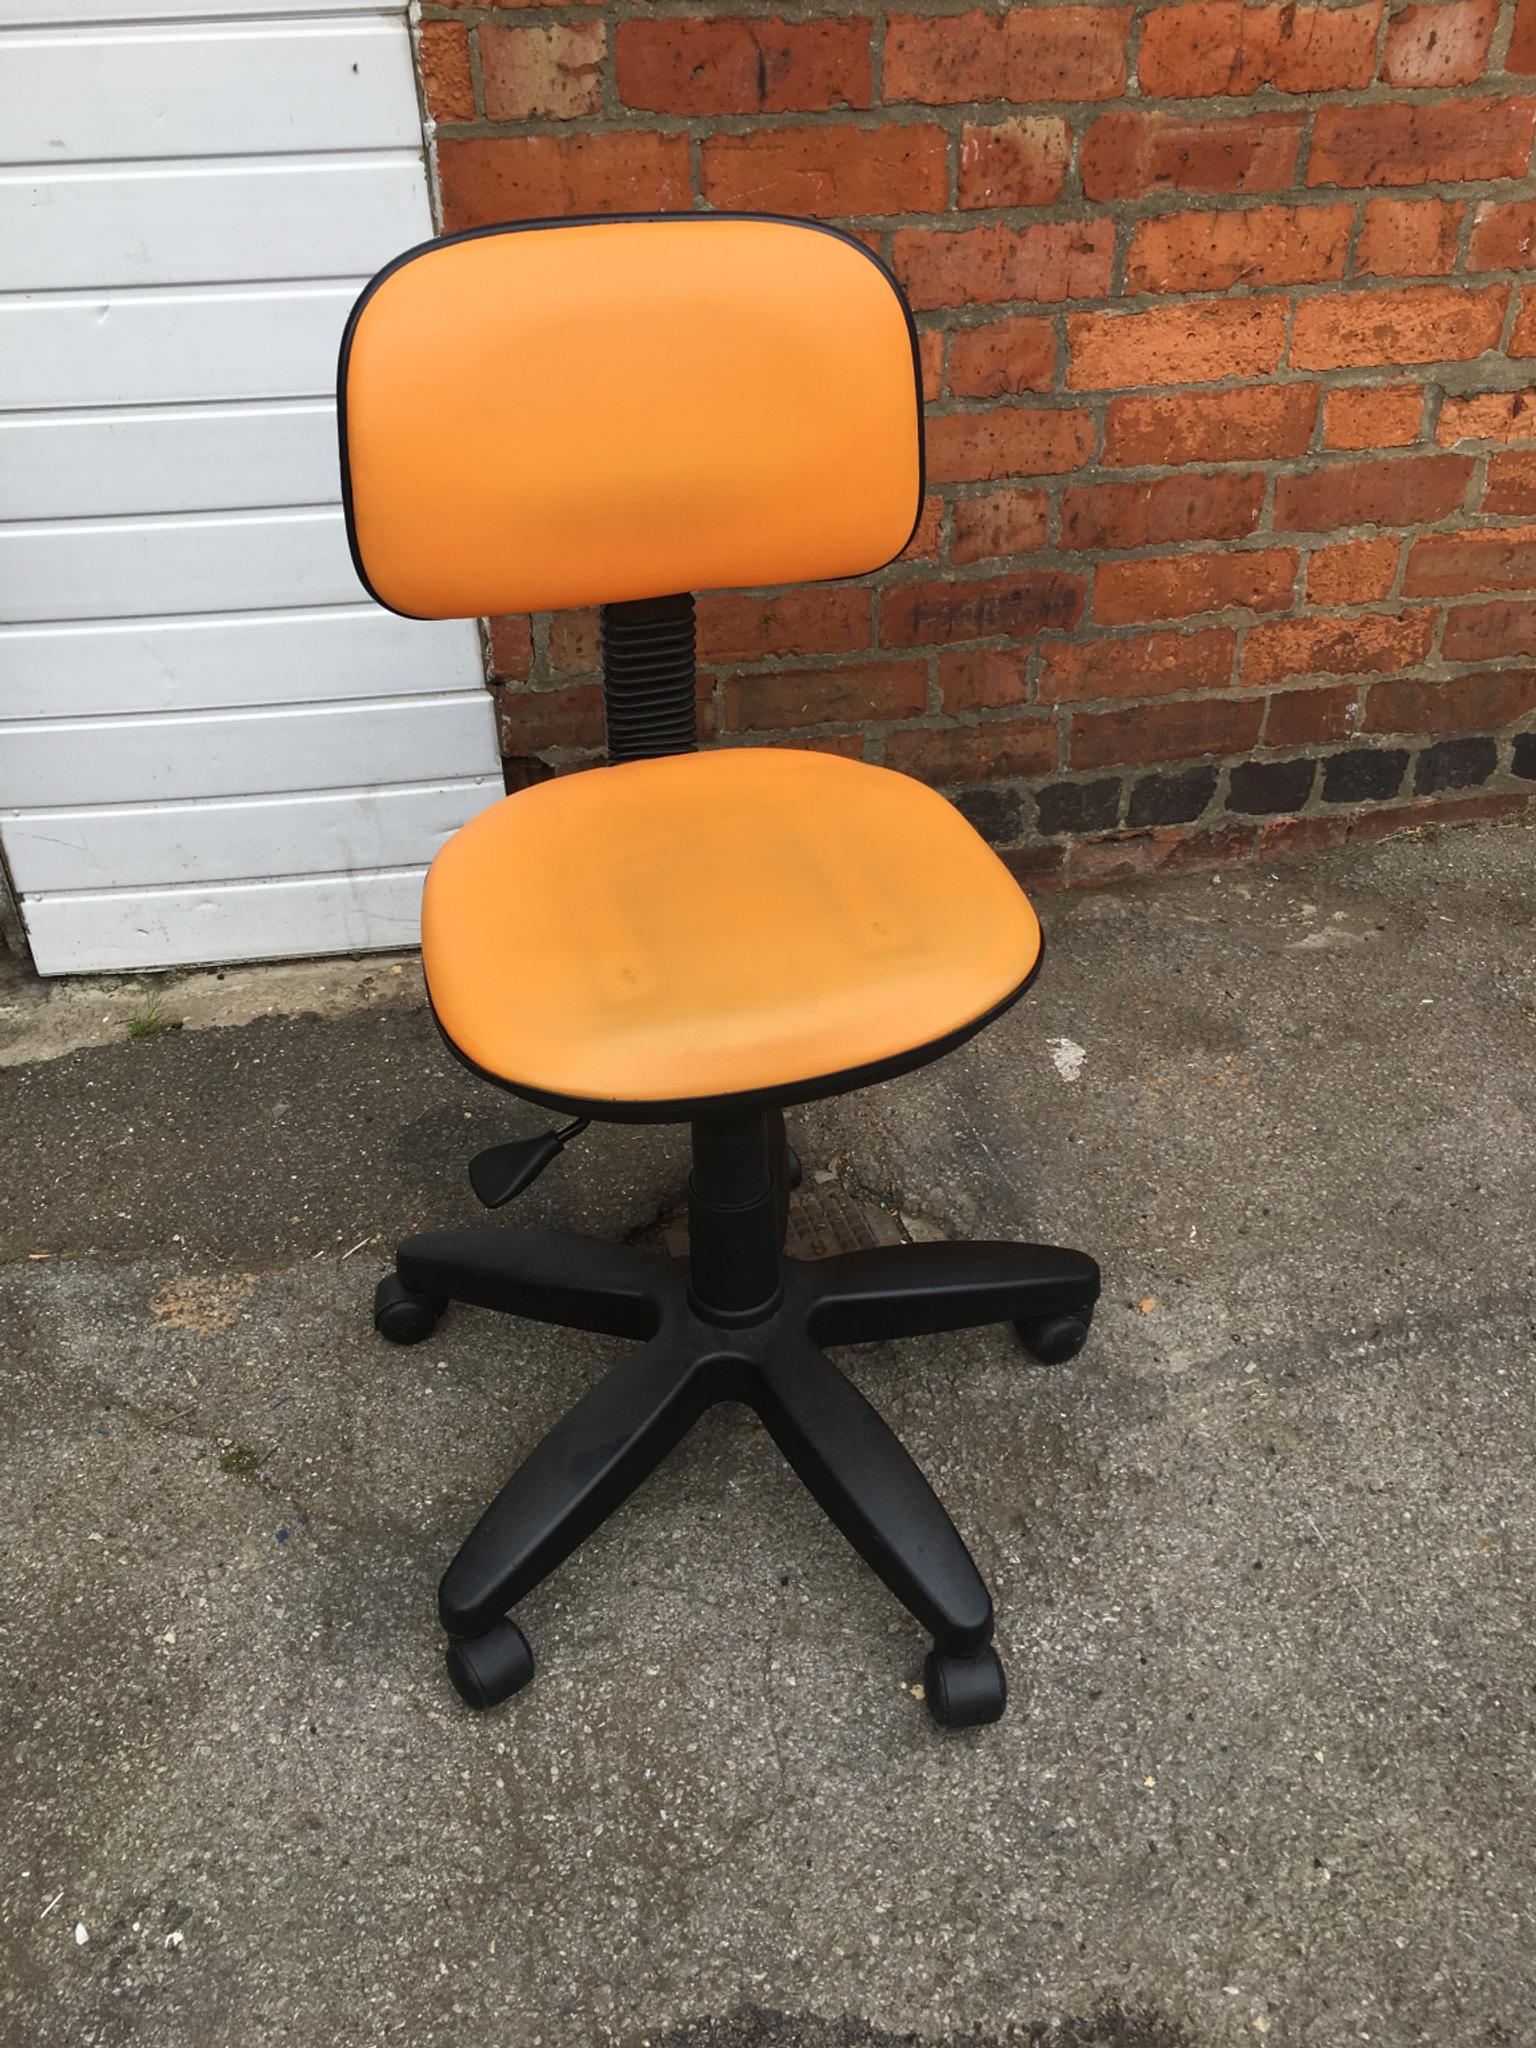 A Child Size Office Chair In Nn1 Northampton For 10 00 For Sale